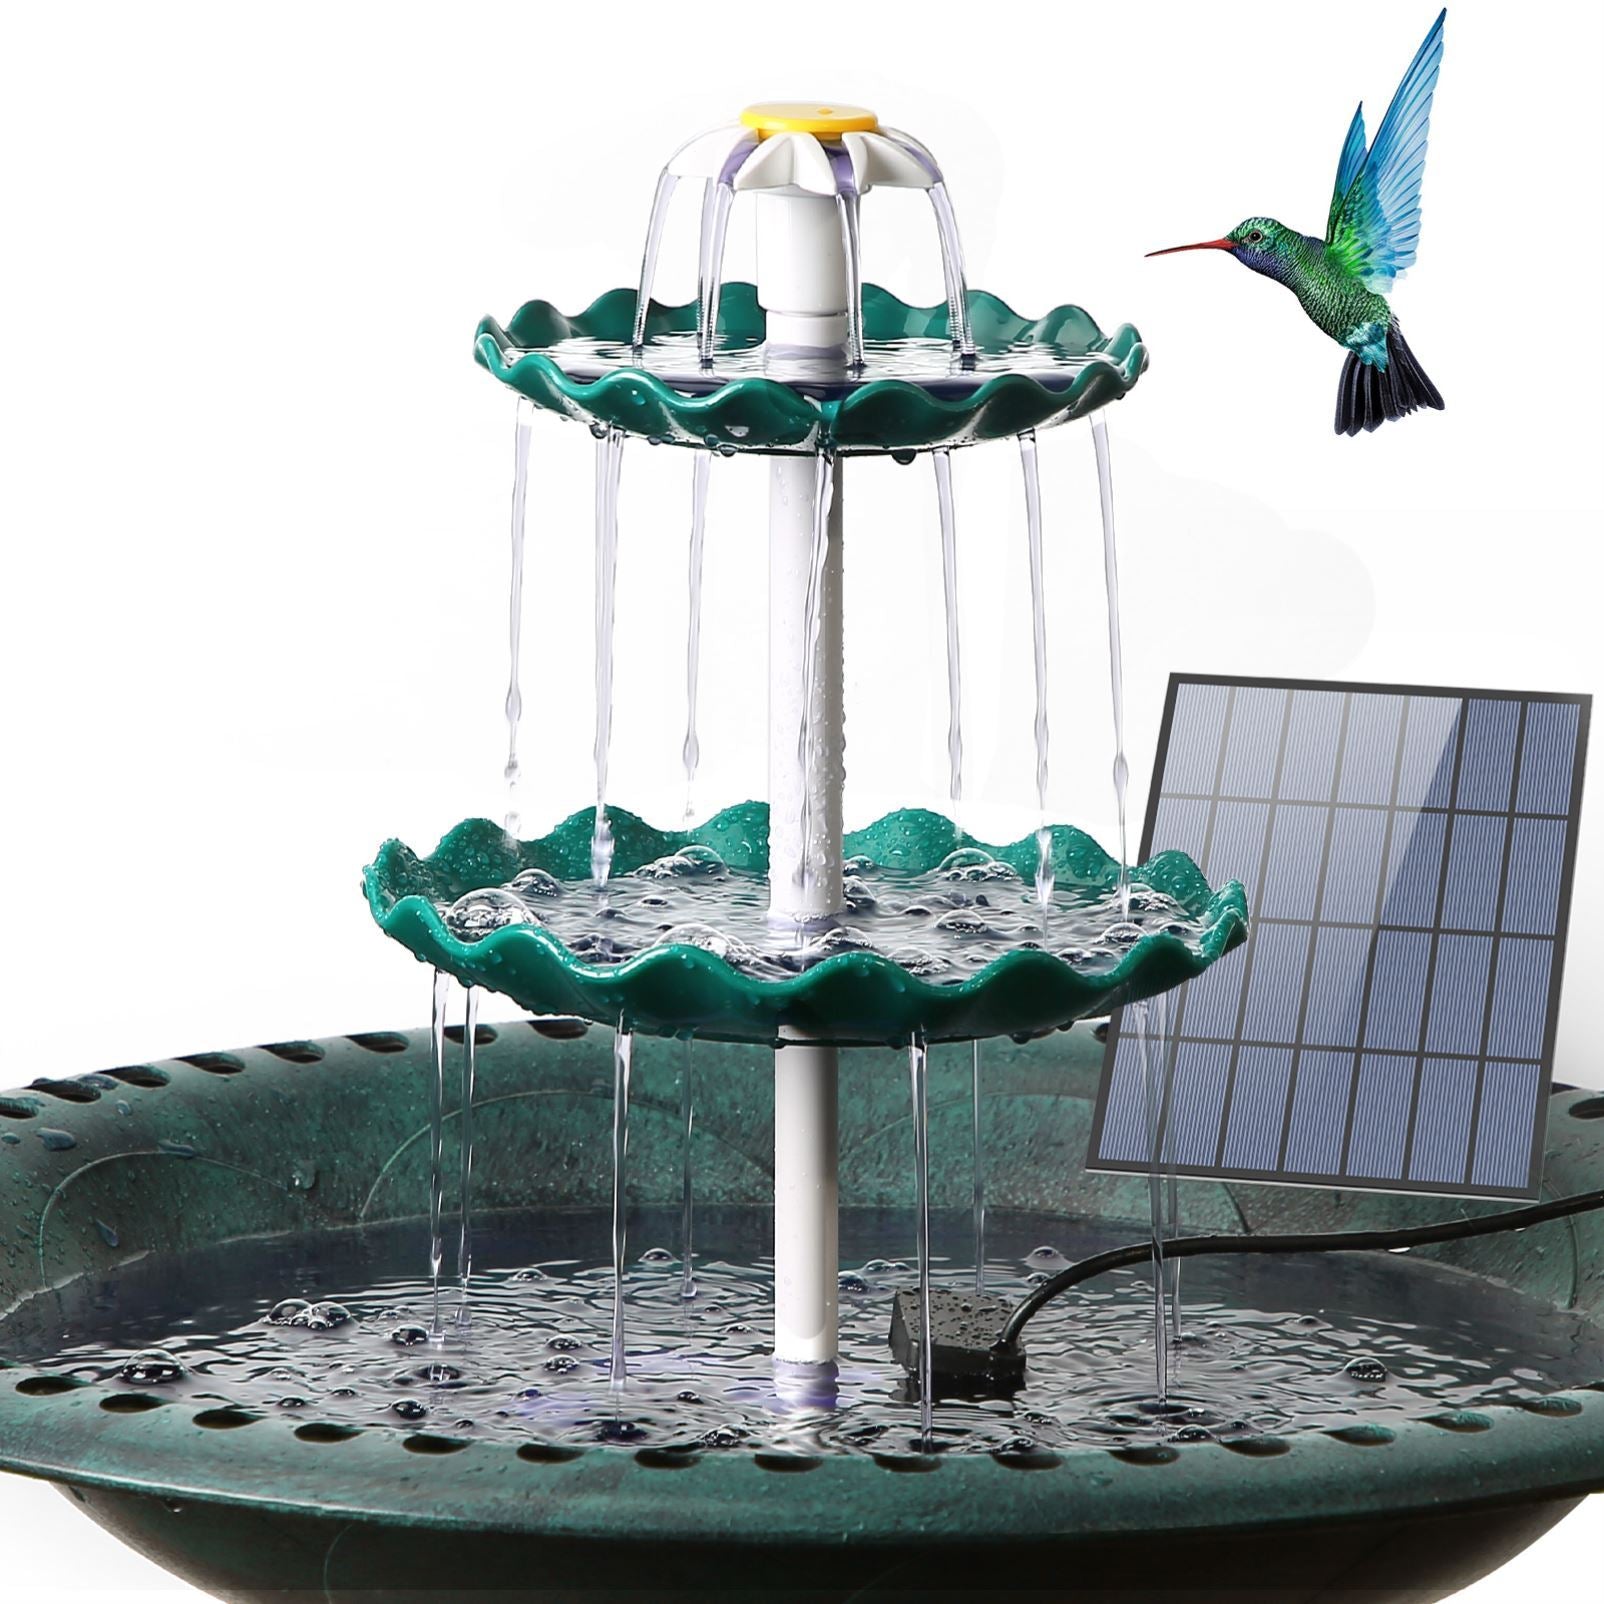 Small Automatic Water Circulation Of Outdoor Solar Fountain | Decor Gifts and More